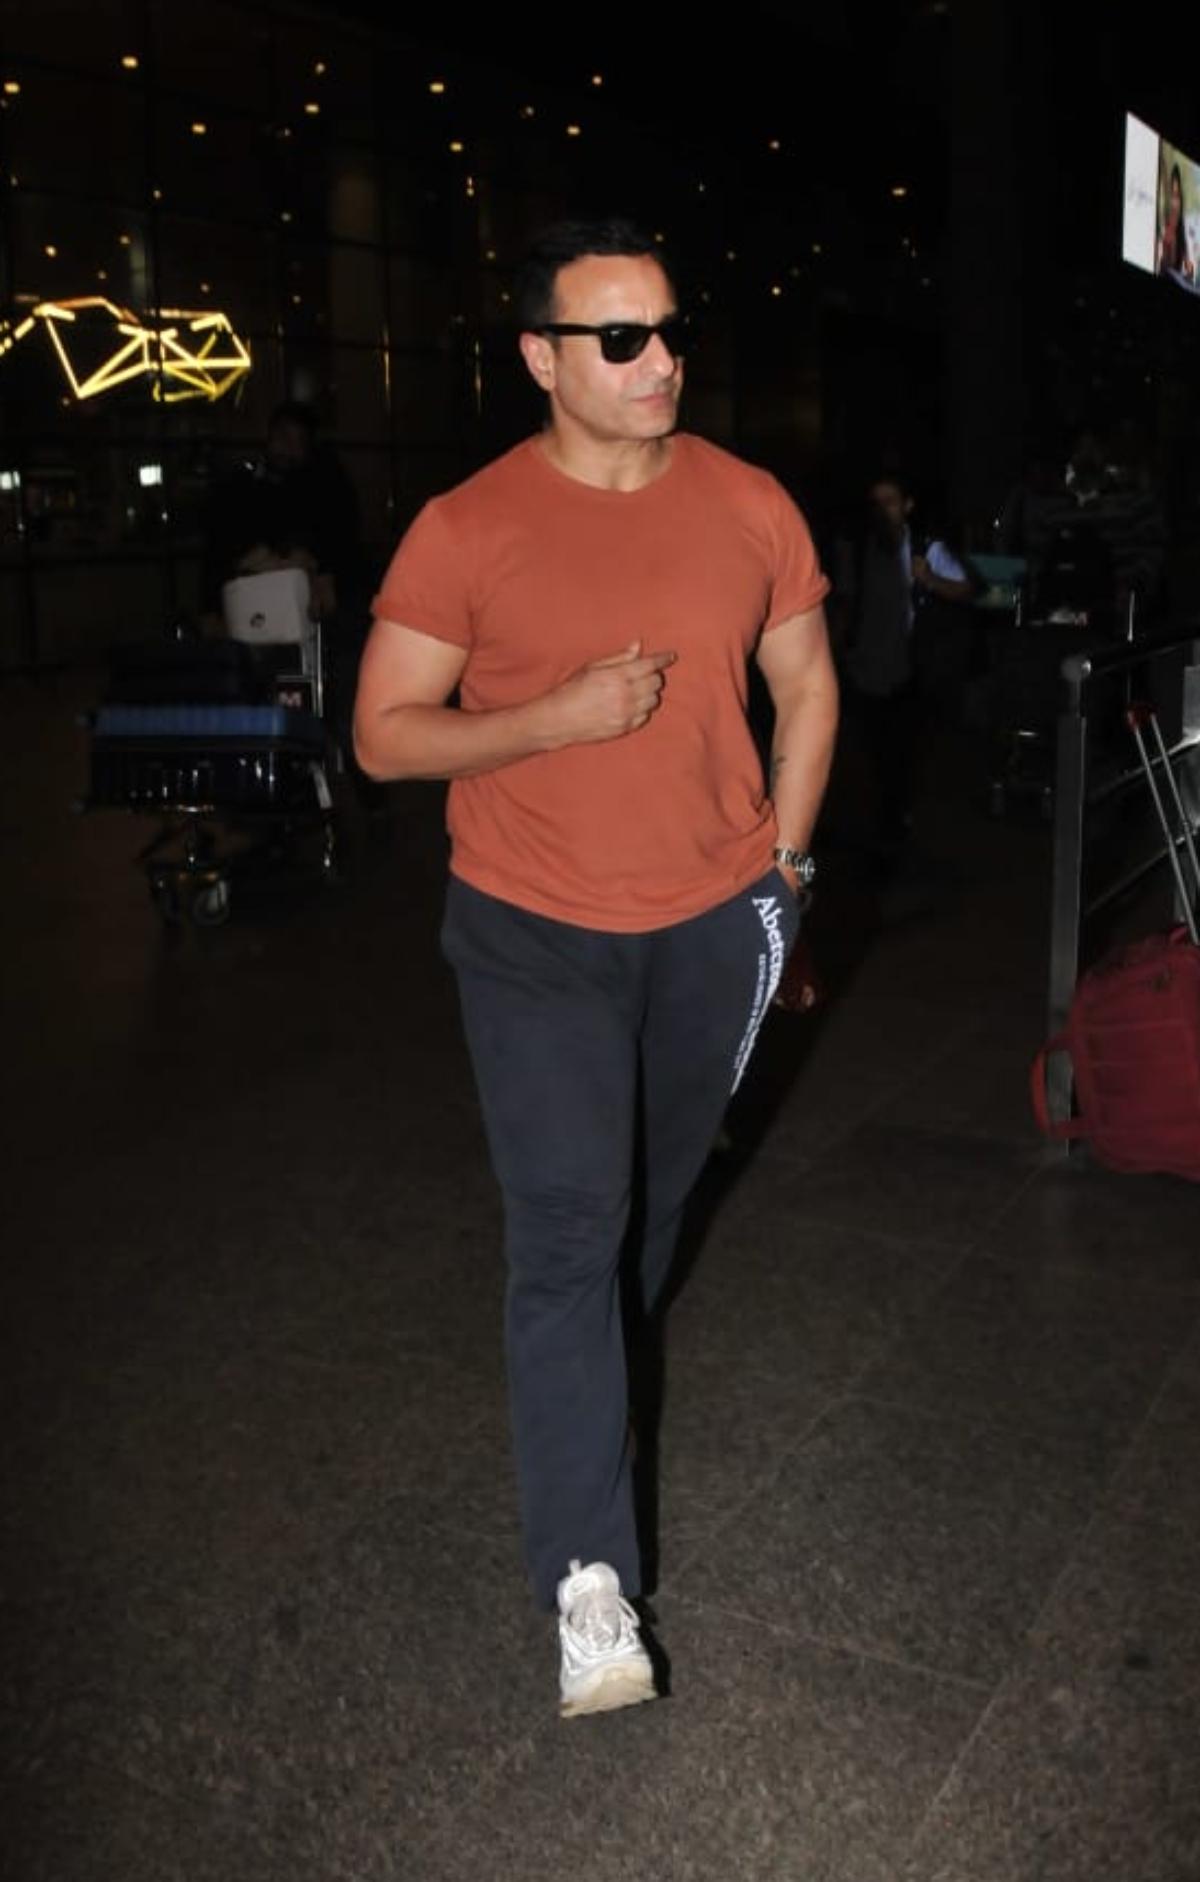 Meanwhile, Kareena's actor-husband, Saif Ali Khan kept it simple with a basic rust orange t-shirt and slightly printed black track pants. Like her wife, the 'Omkara' star completed his airport look with white sneakers and black sunglasses. 